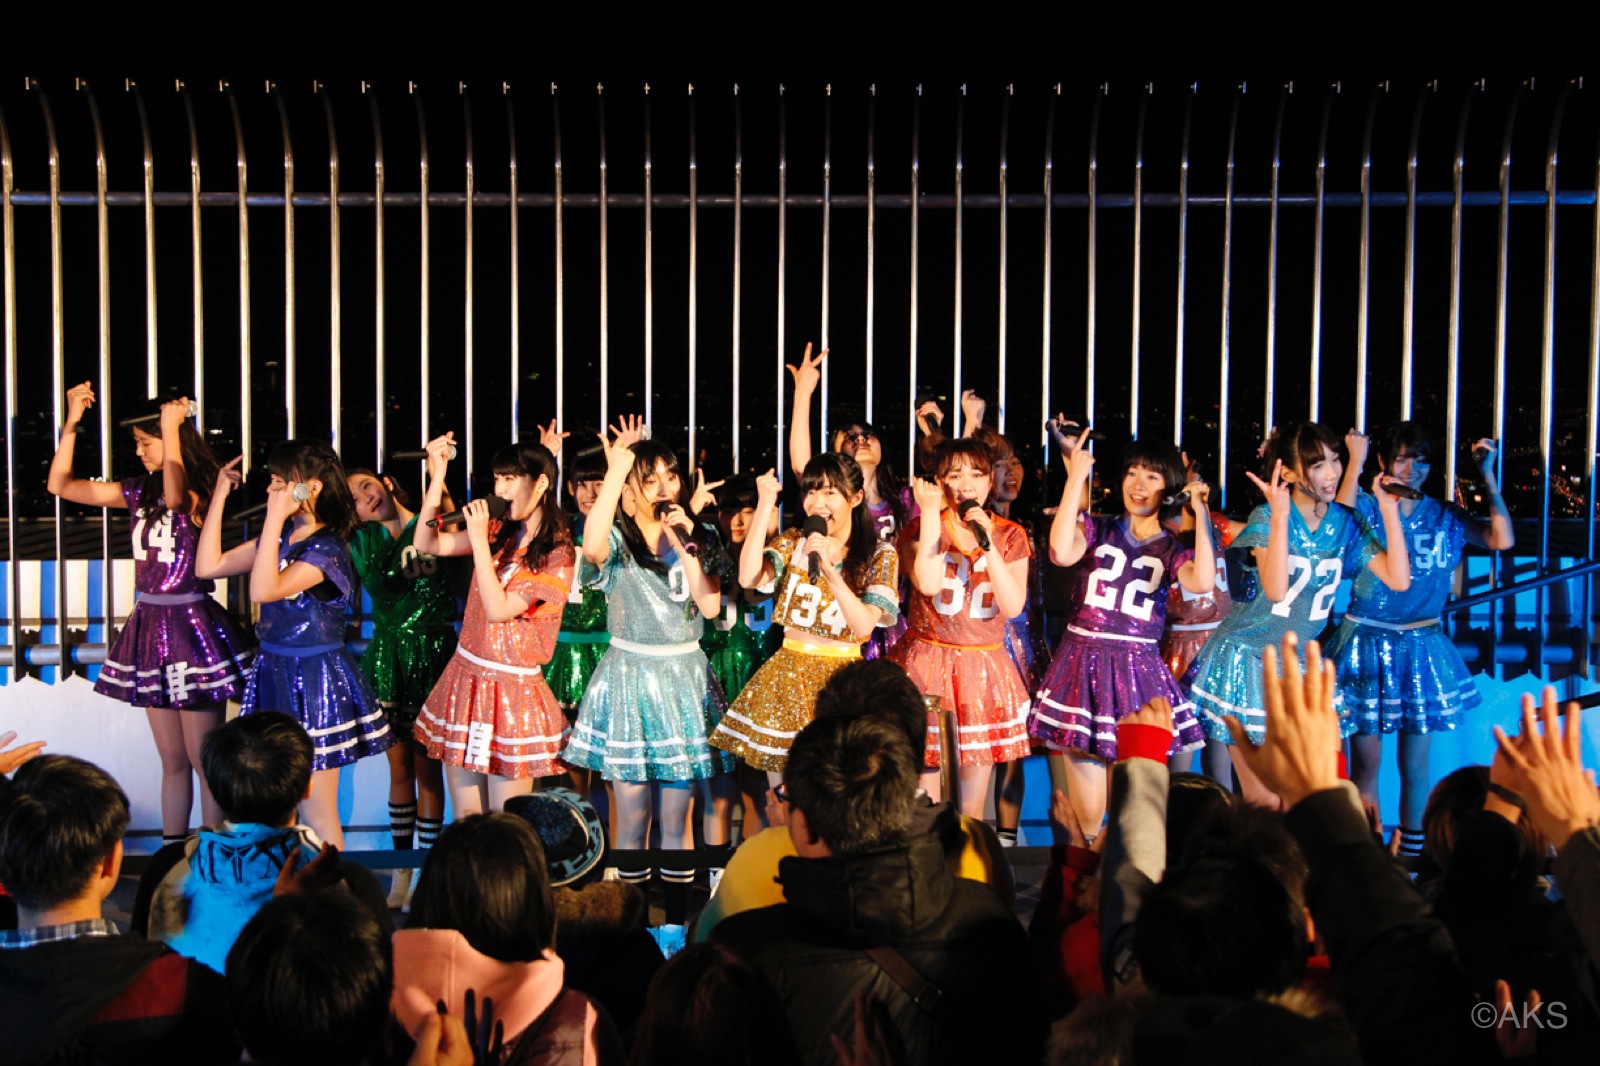 HKT48 Gives Their First Live Performance in Taiwan, and Makes an Announcement About Recruiting New Taiwanese Members!